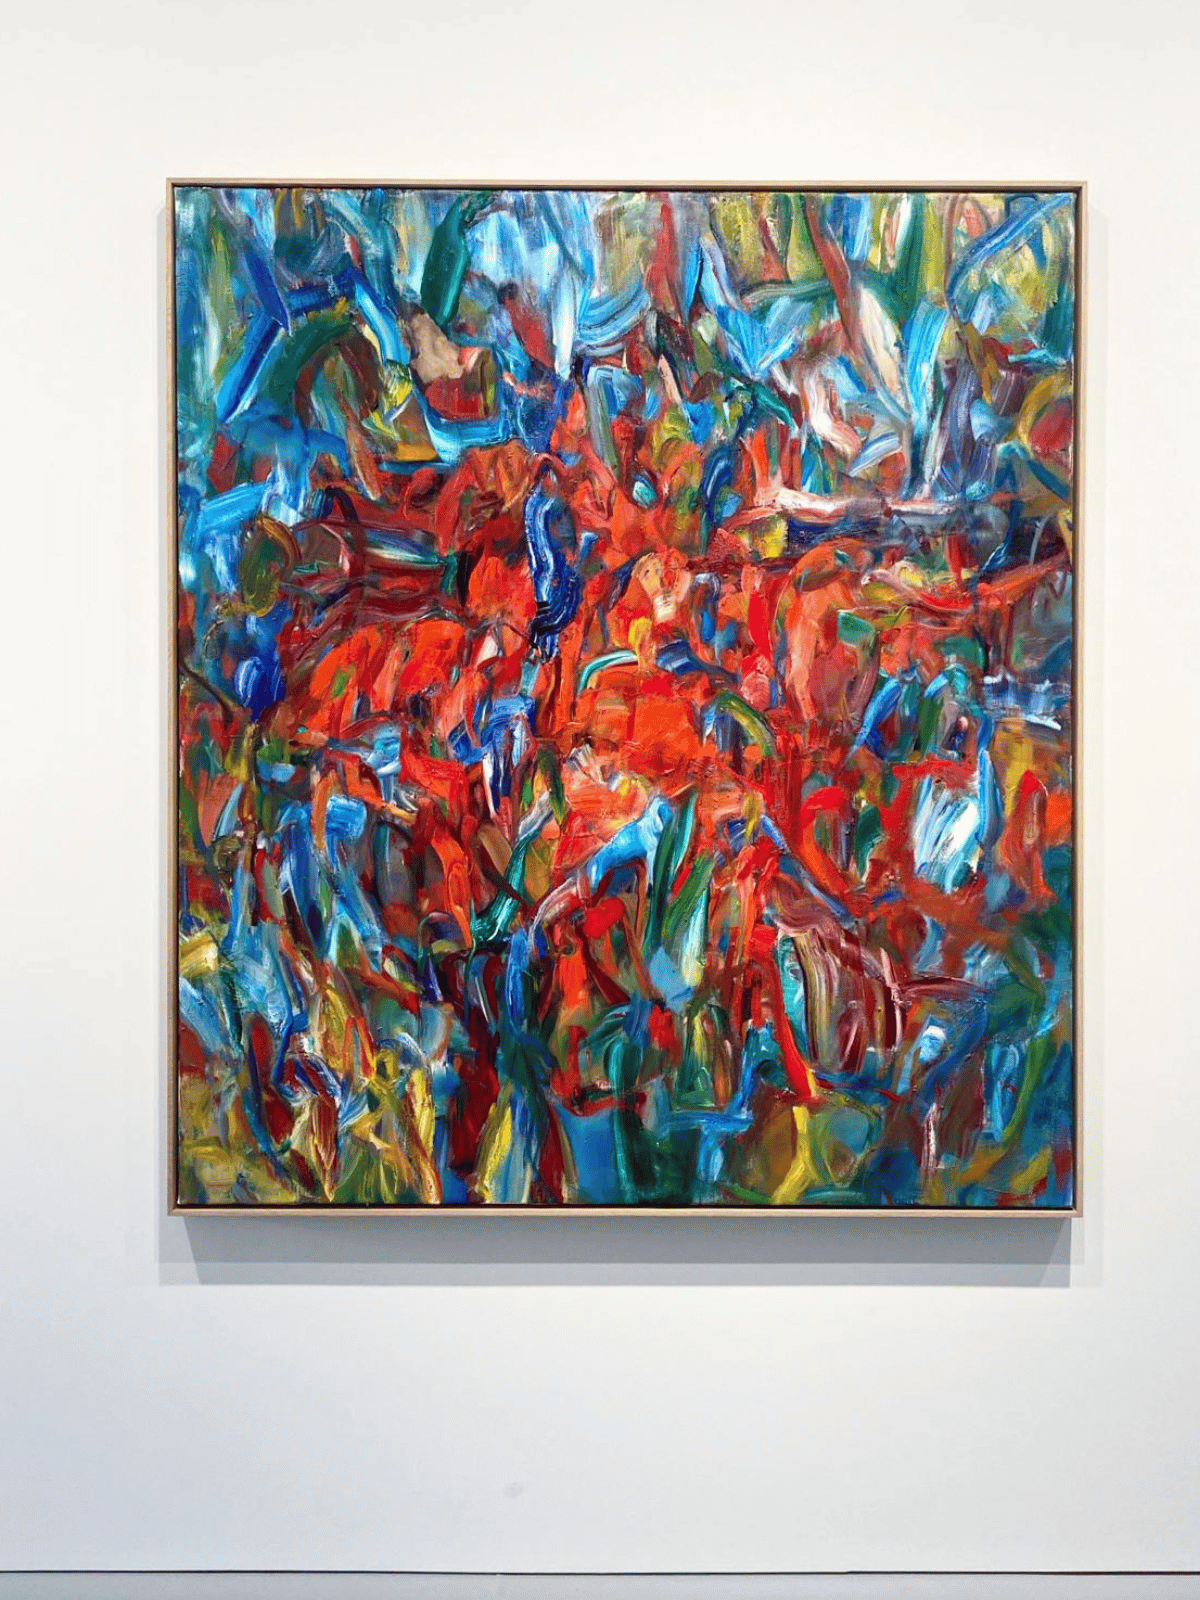 Colourful Abstract artwork in art gallery